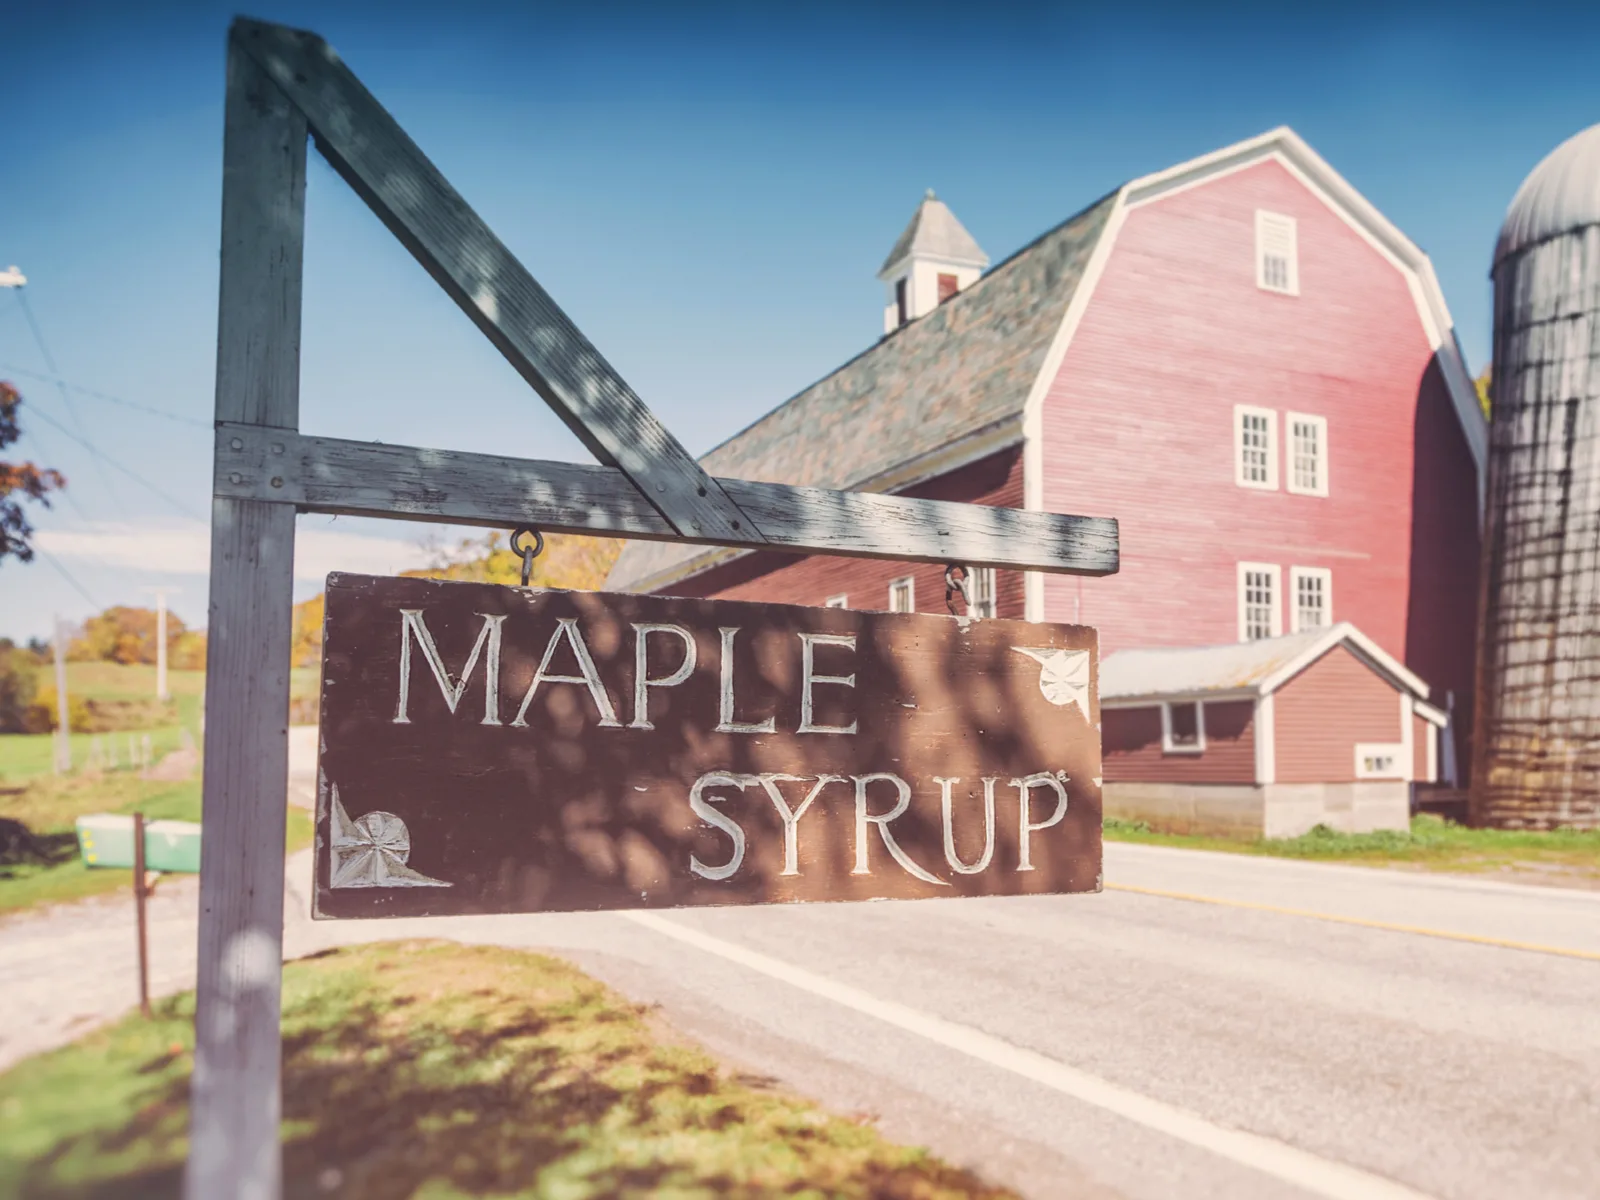 Maple farm entrance, one of the best things to do in Vermont